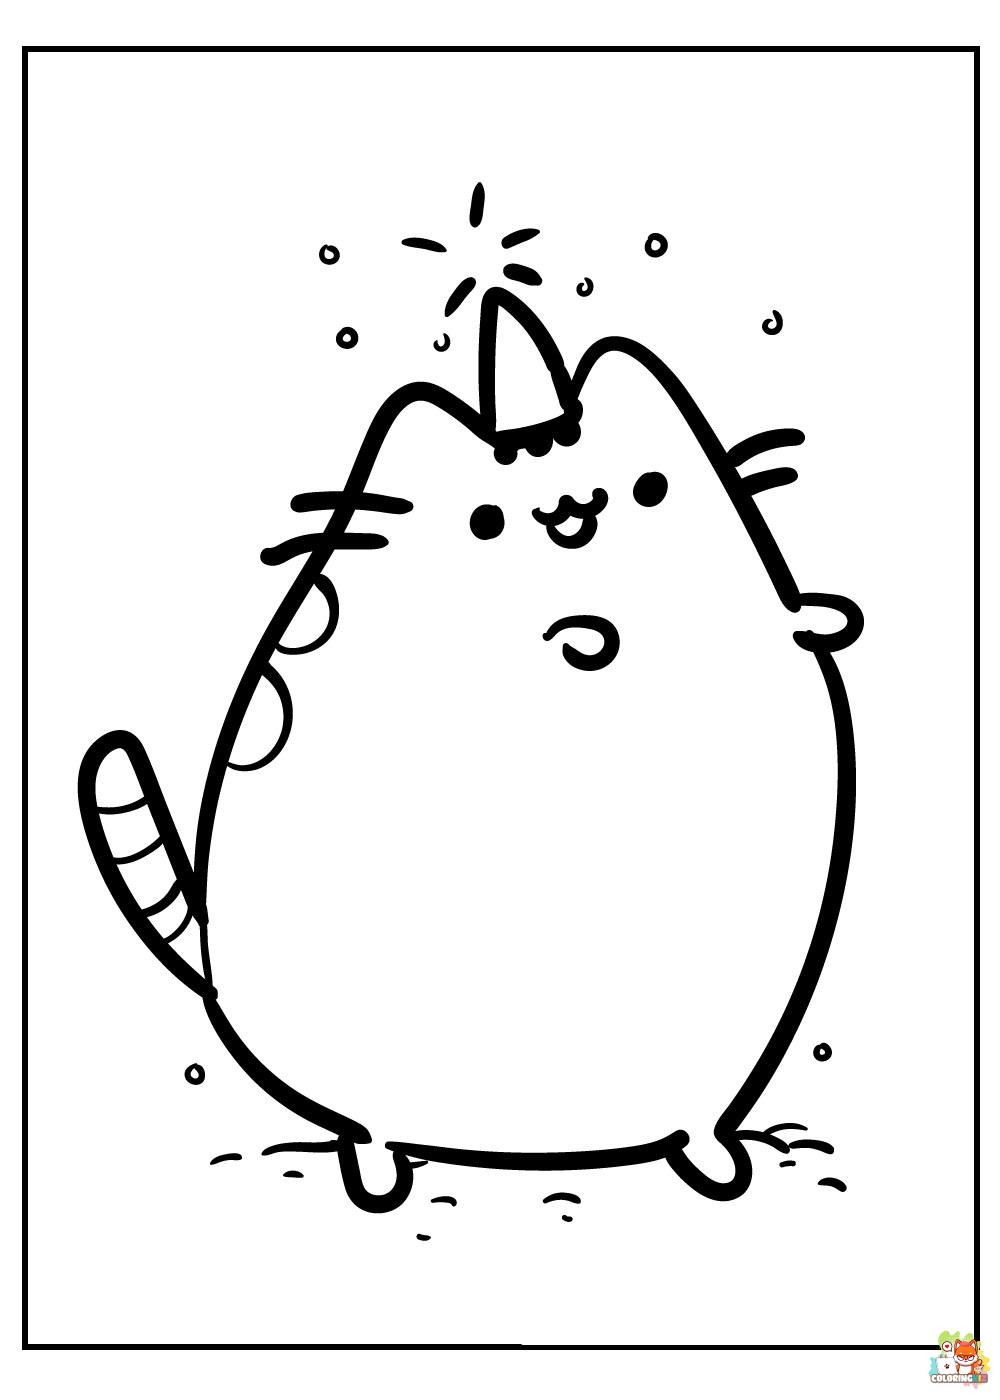 Unicorn Pusheen Coloring Pages 11